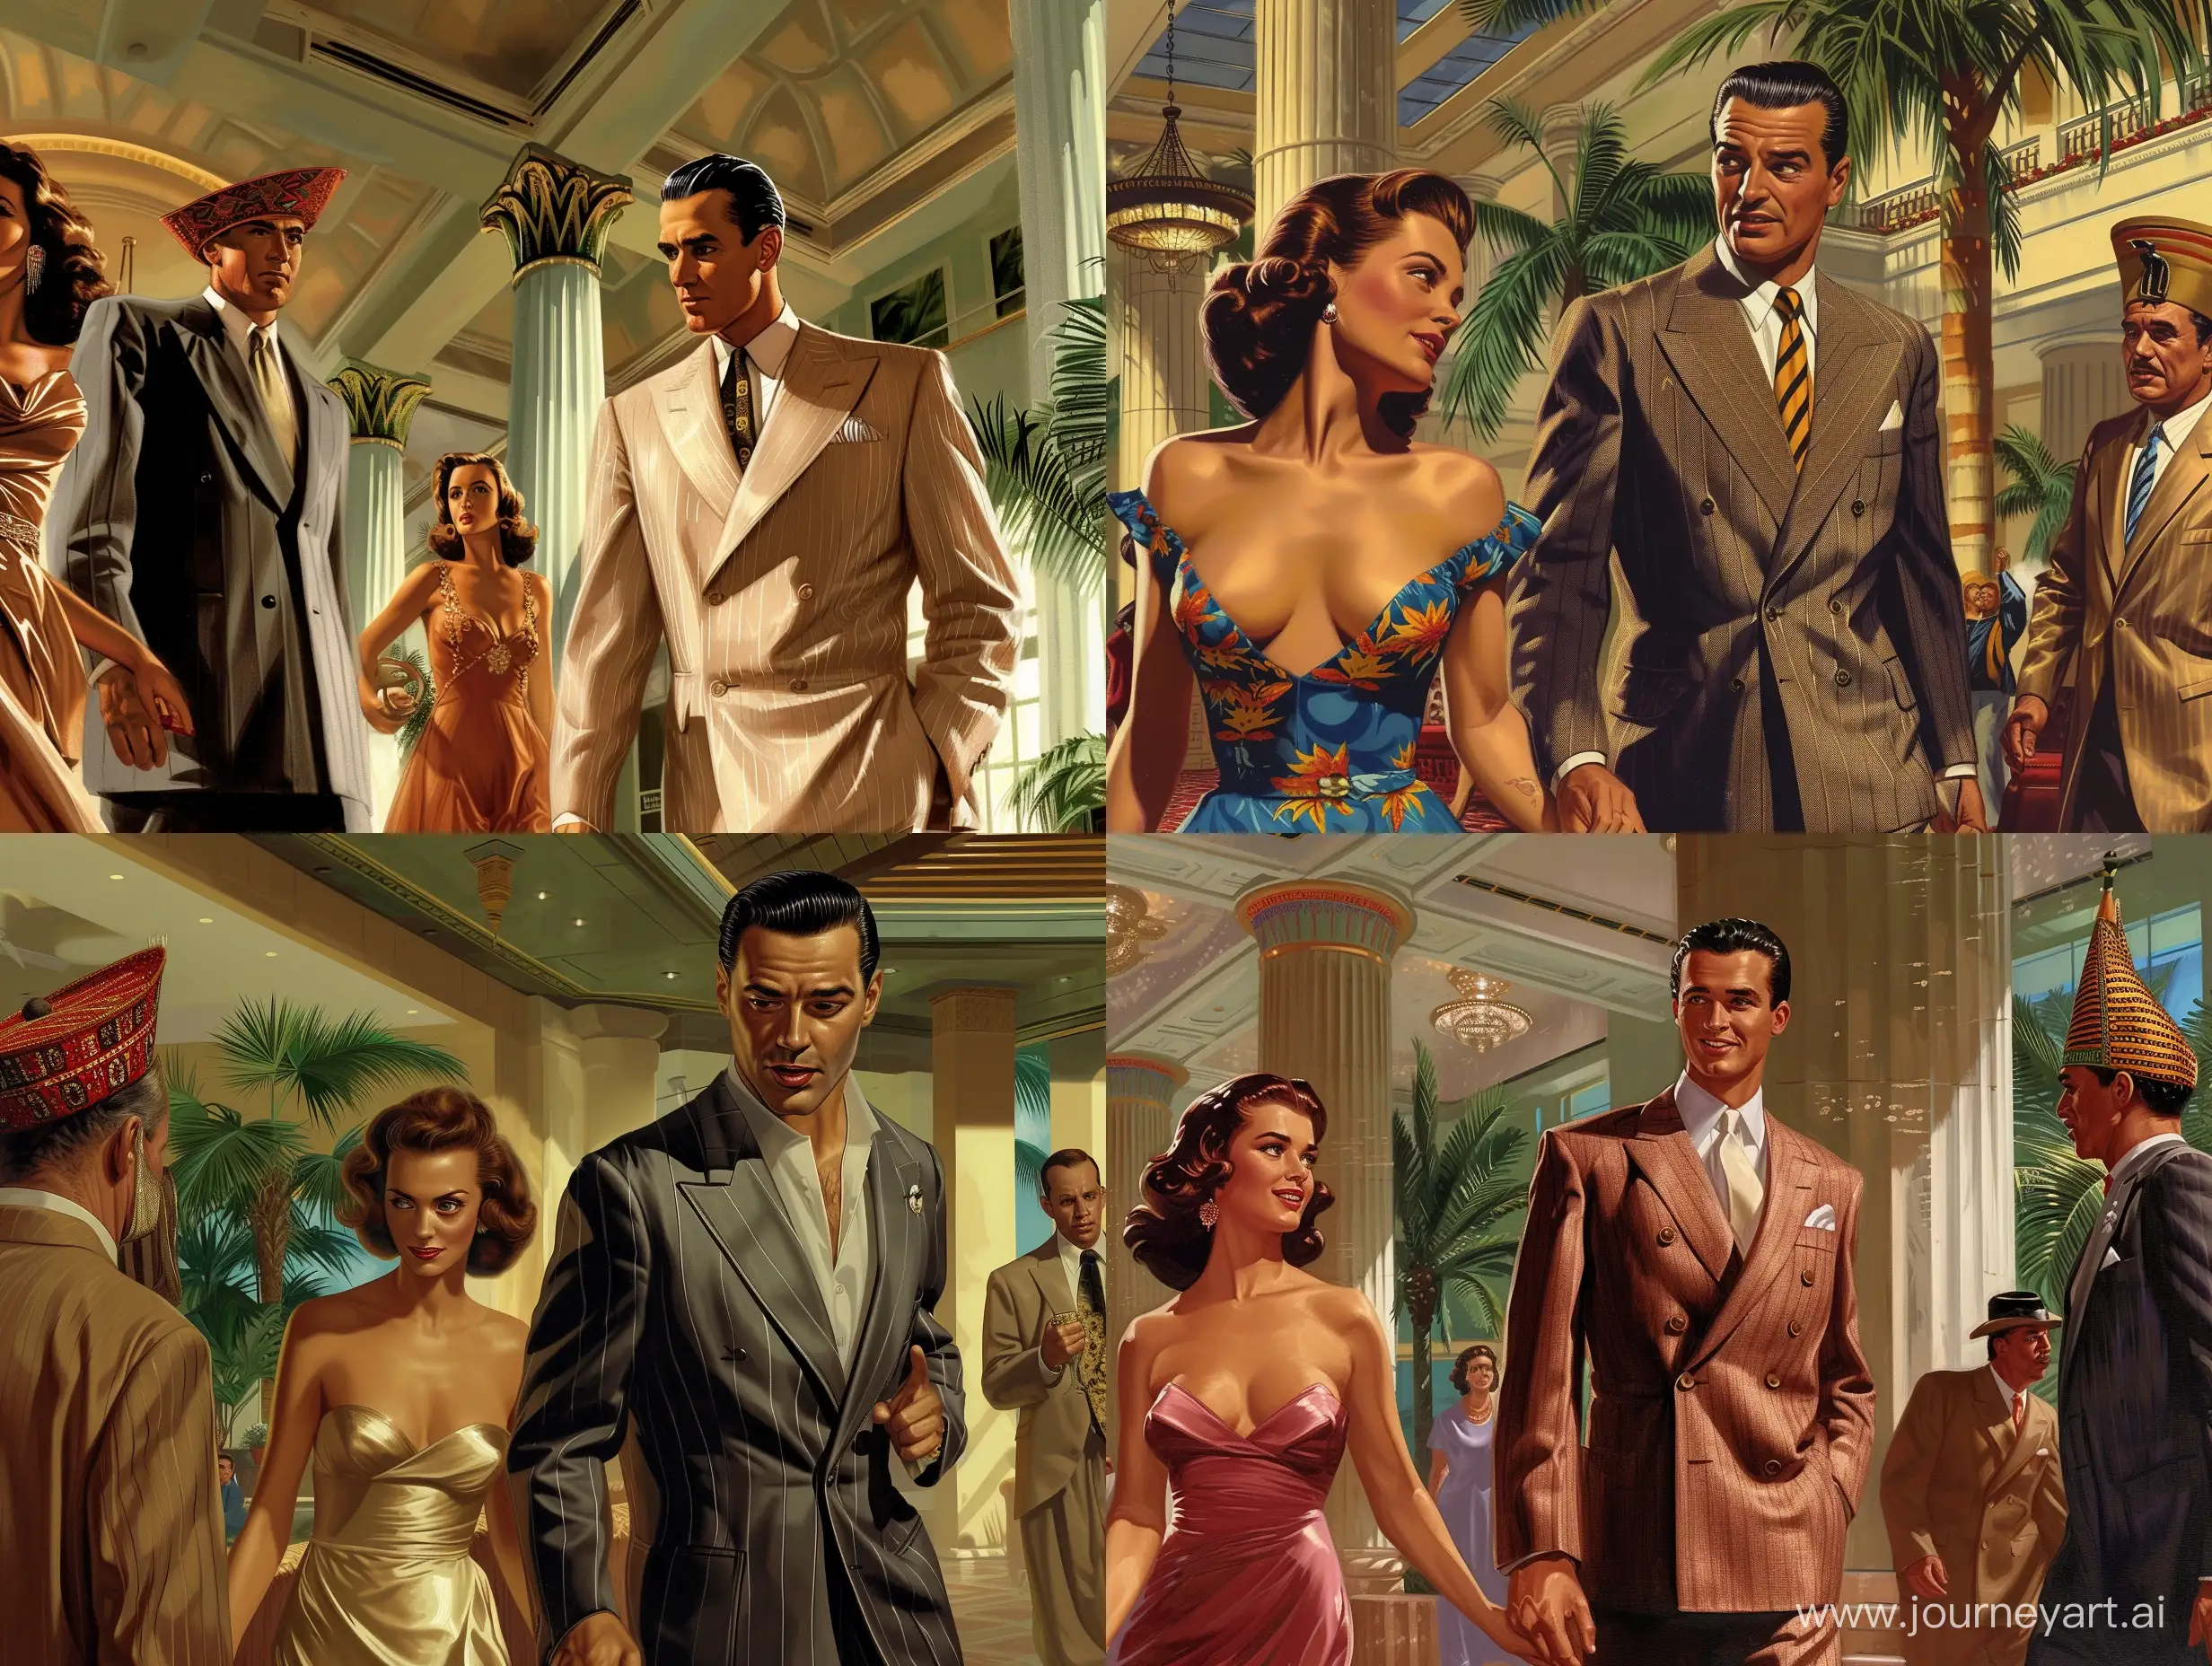 Robert Maguire style Pulp art of a glamorous 1940s handsome actor man with slicked-back hair wearing formal 1940s suit inside a 1940s Miami hotel lobby, and walking with a woman wearing 1940s low-cut evening dress, with a man wearing Egyptian fez hat and 1940s formal suit standing nearby and looking. --v 6 --ar 4:3 --no 27759